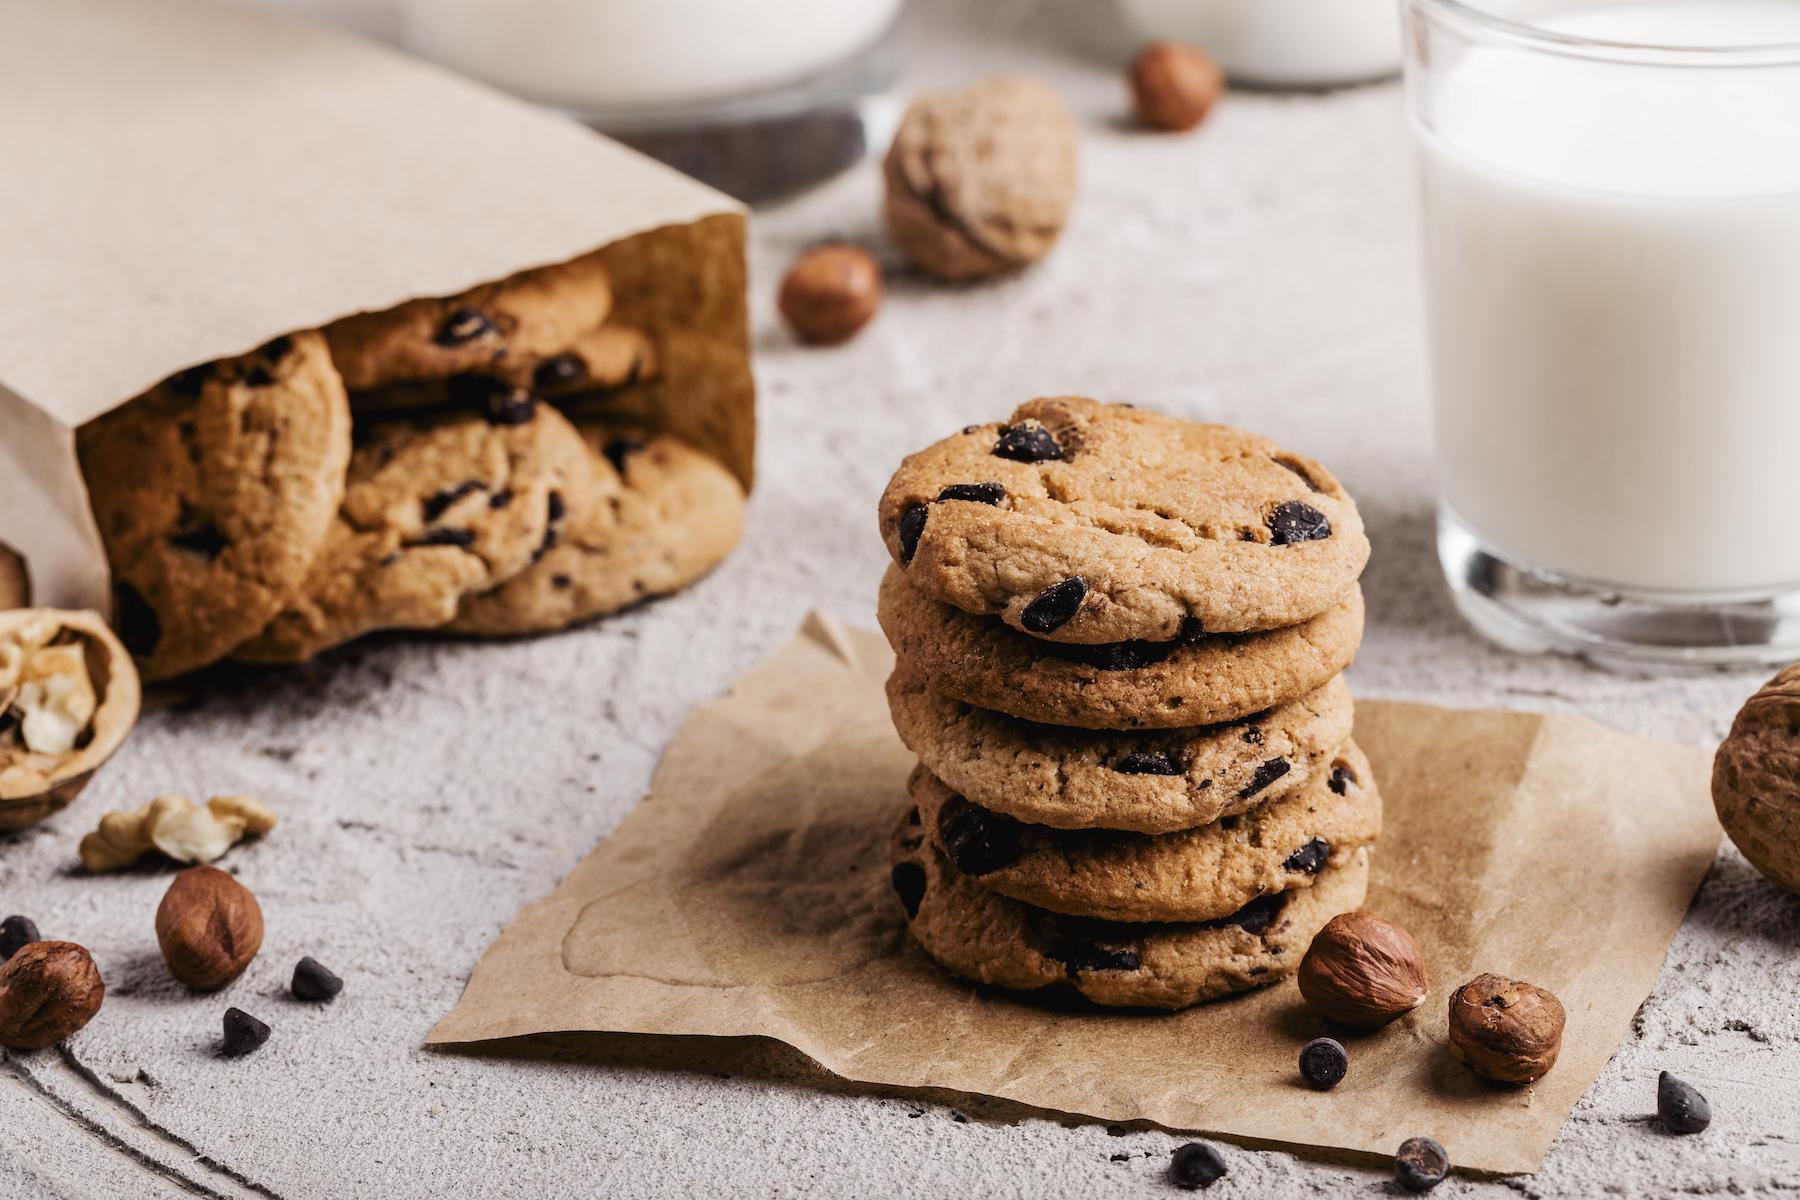 Delicious chocolate chip cookies. With a background in which you can see more cookies in a paper bag and a glass of milk